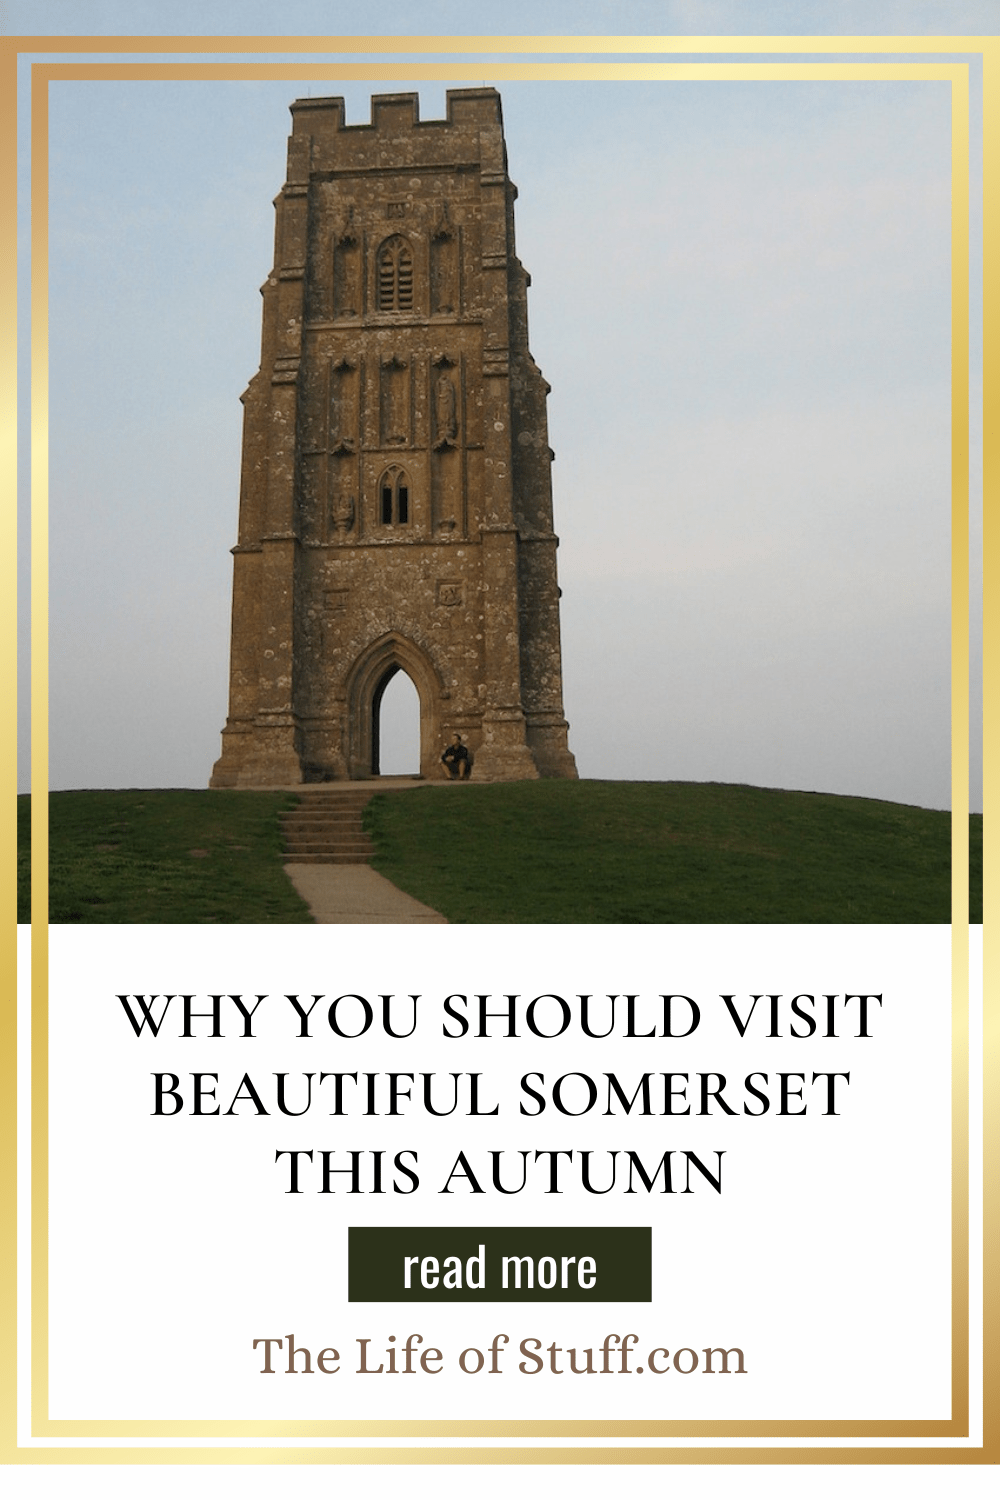 Why You Should Visit Beautiful Somerset this Autumn - The Life of Stuff